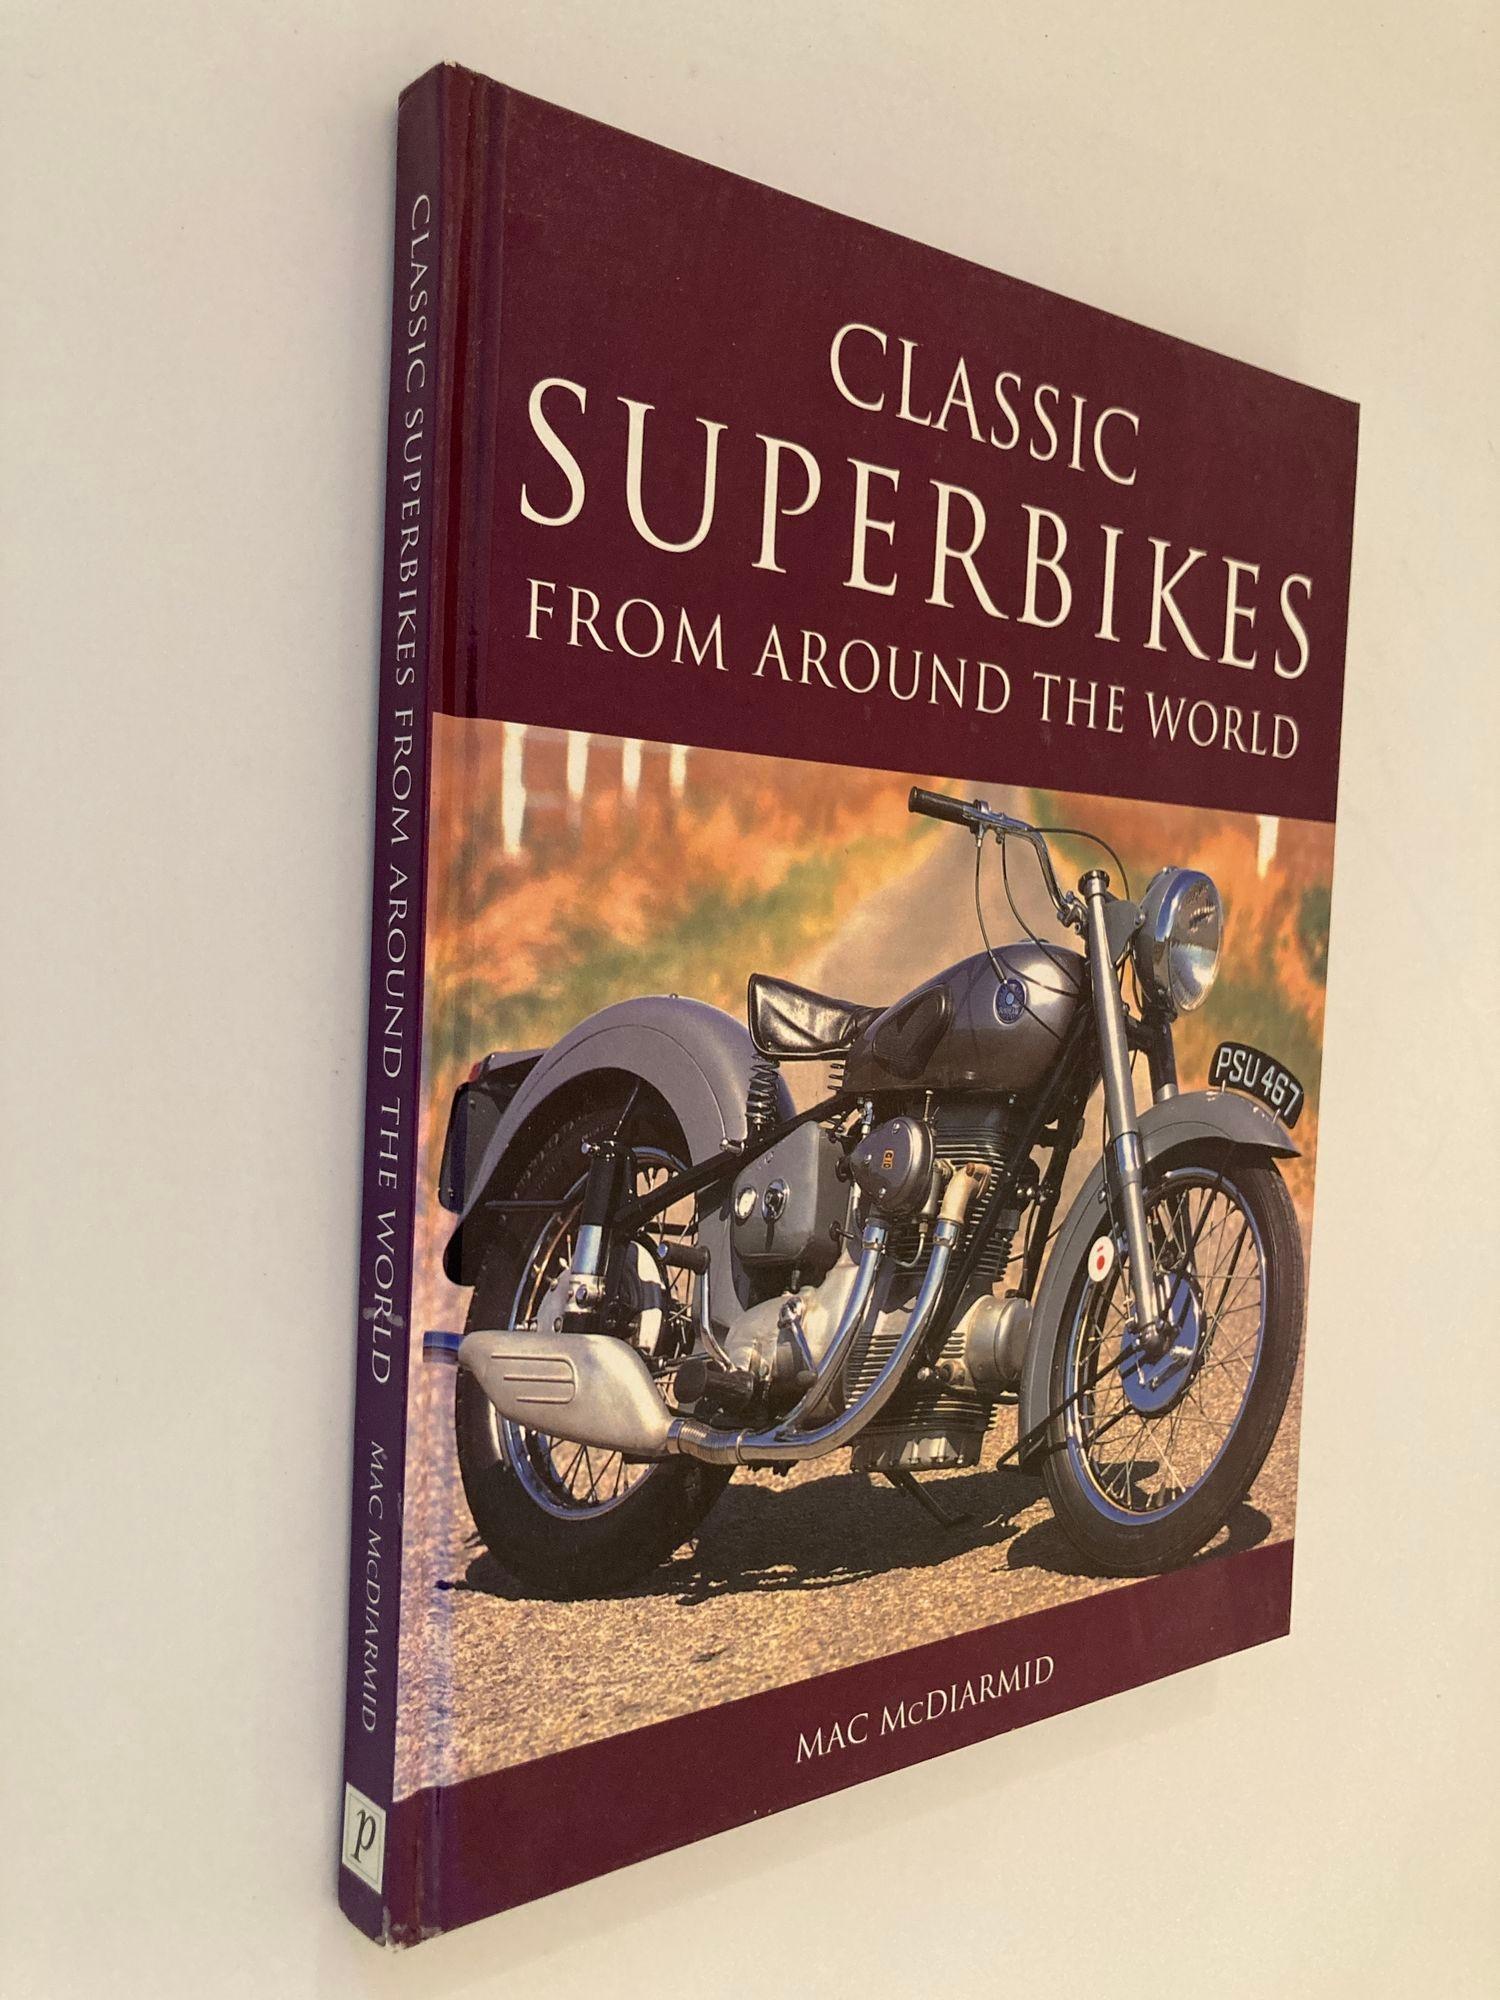 Classic Superbikes from Around the World Coffee Table Book Hardcover 2003.
by Mac. McDiarmid.
The cool thing about Mac McDiarmid’s book Classic Superbikes from Around the World.
The book not only gives us a look at some rare specimens most will